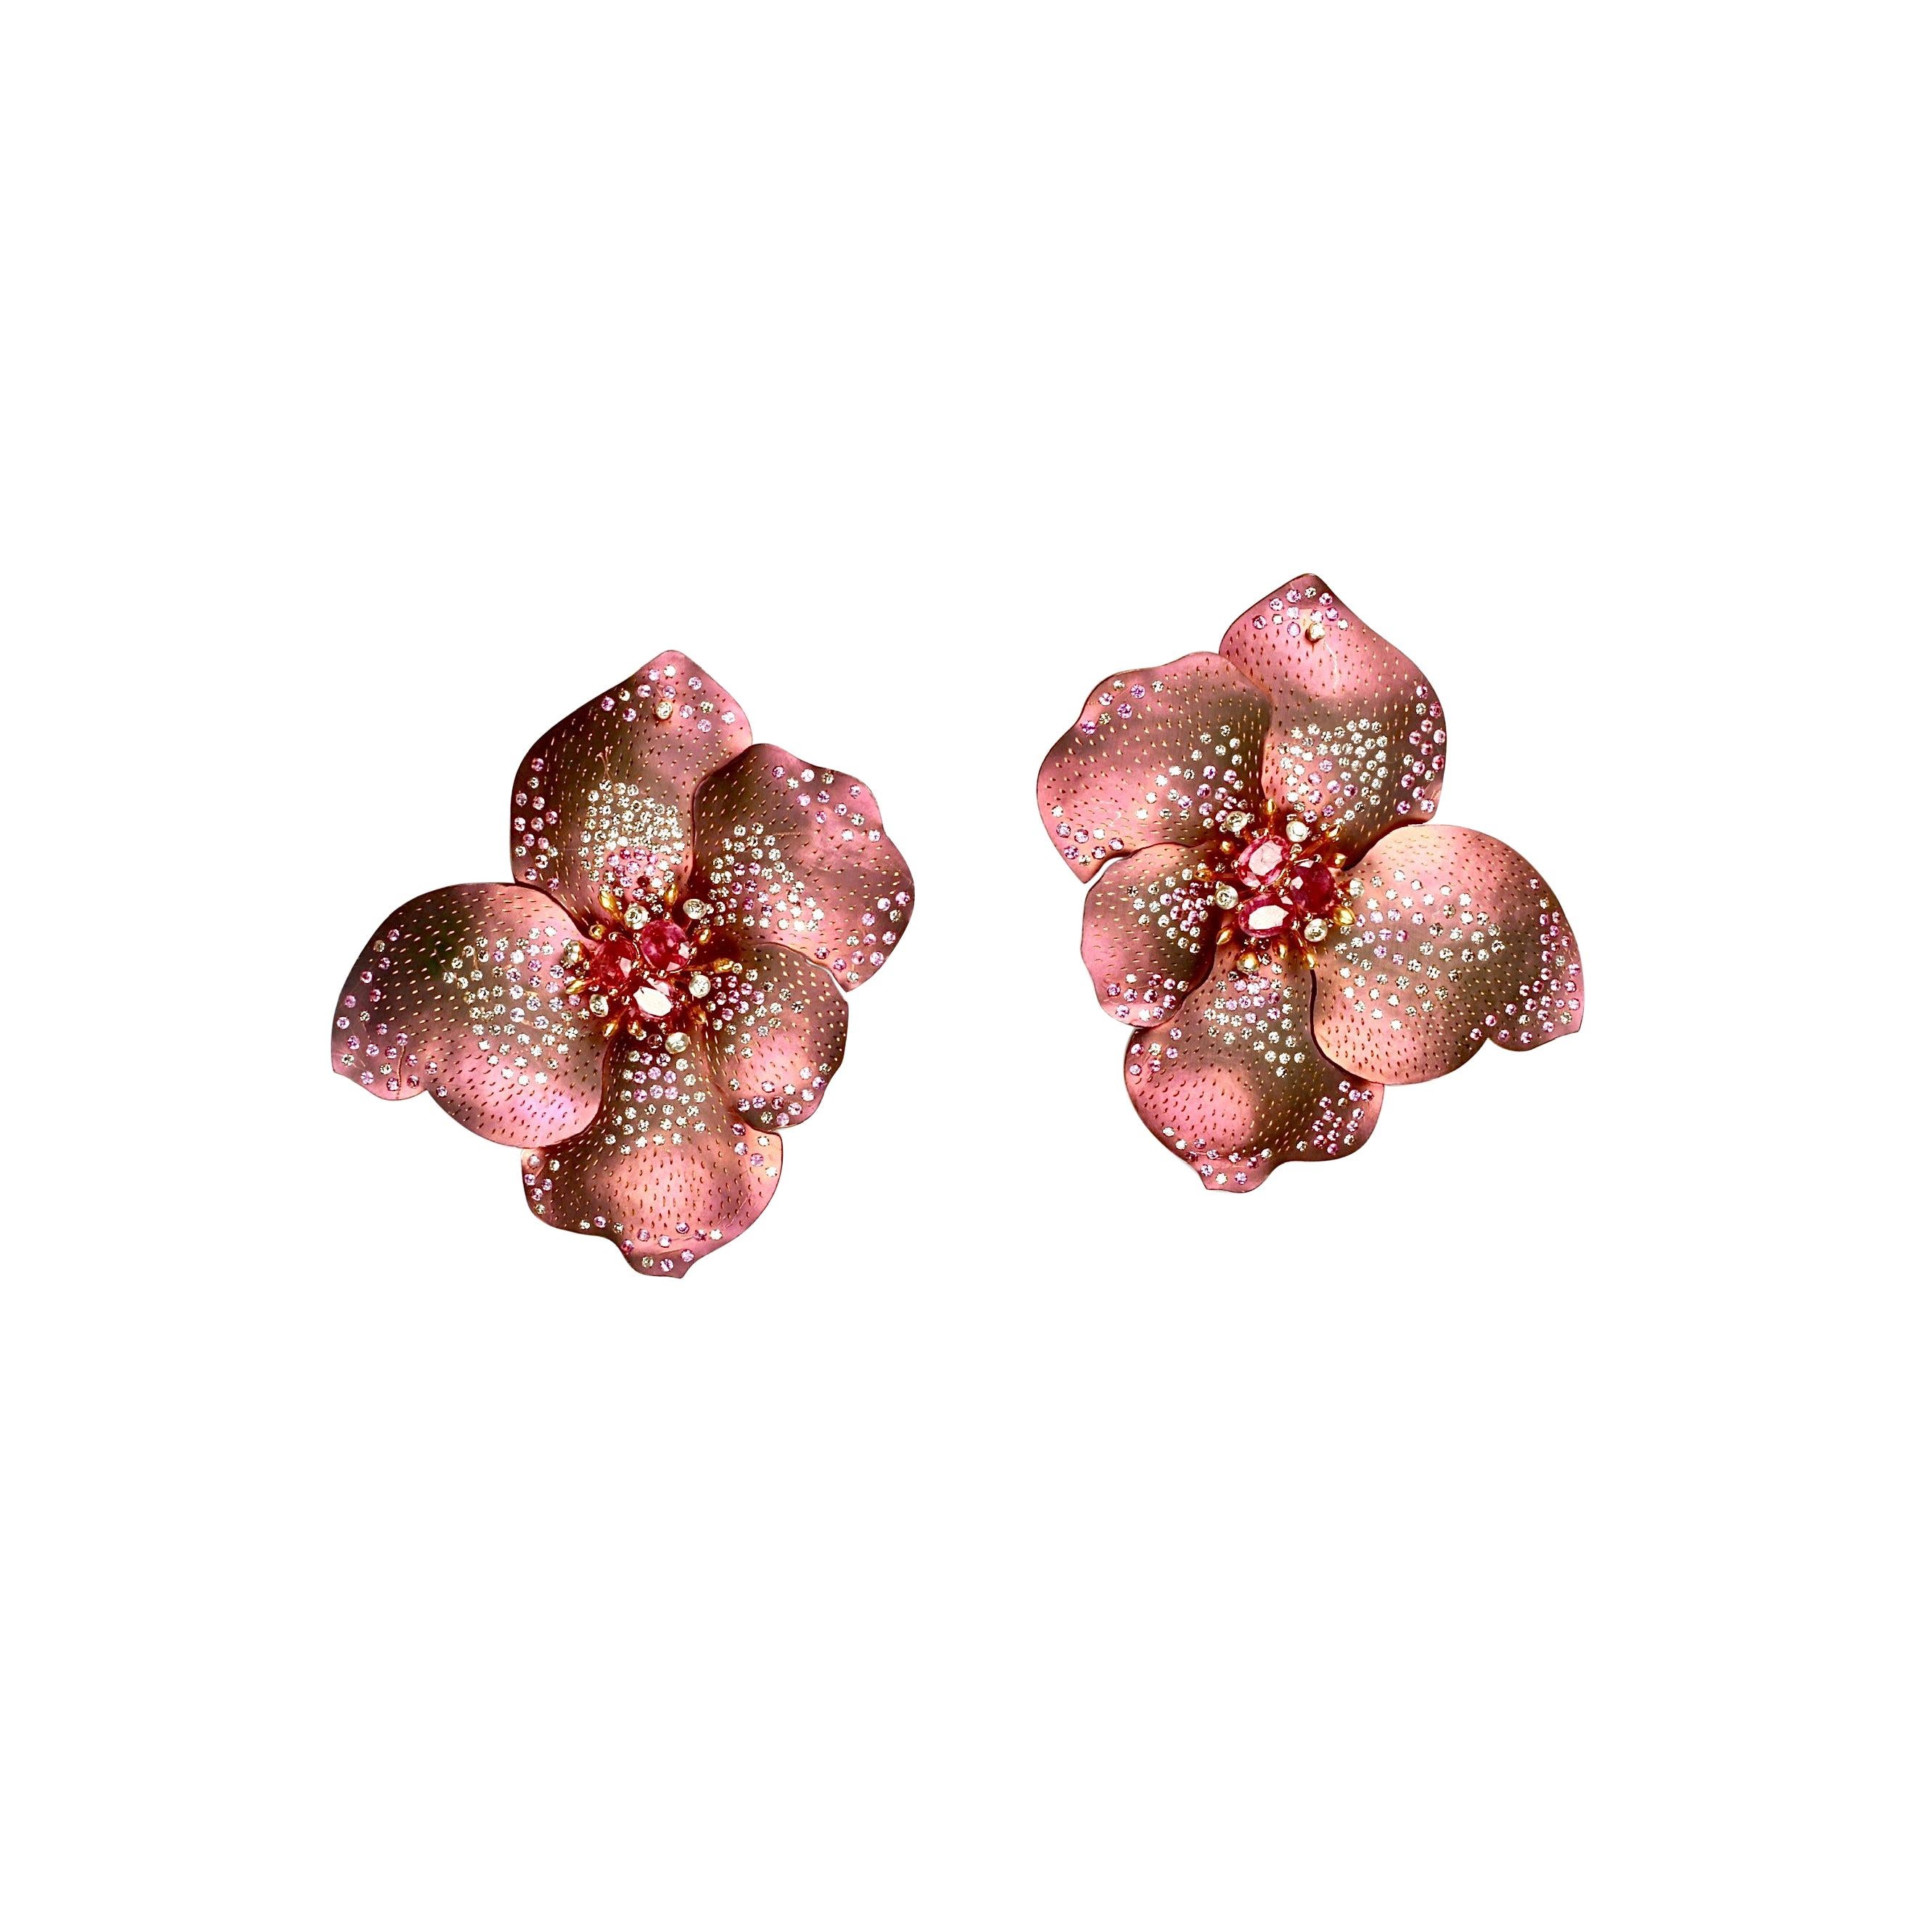 Gold Rose Titanium Earrings with Pink Tourmalines, Diamonds and Pink Sapphires